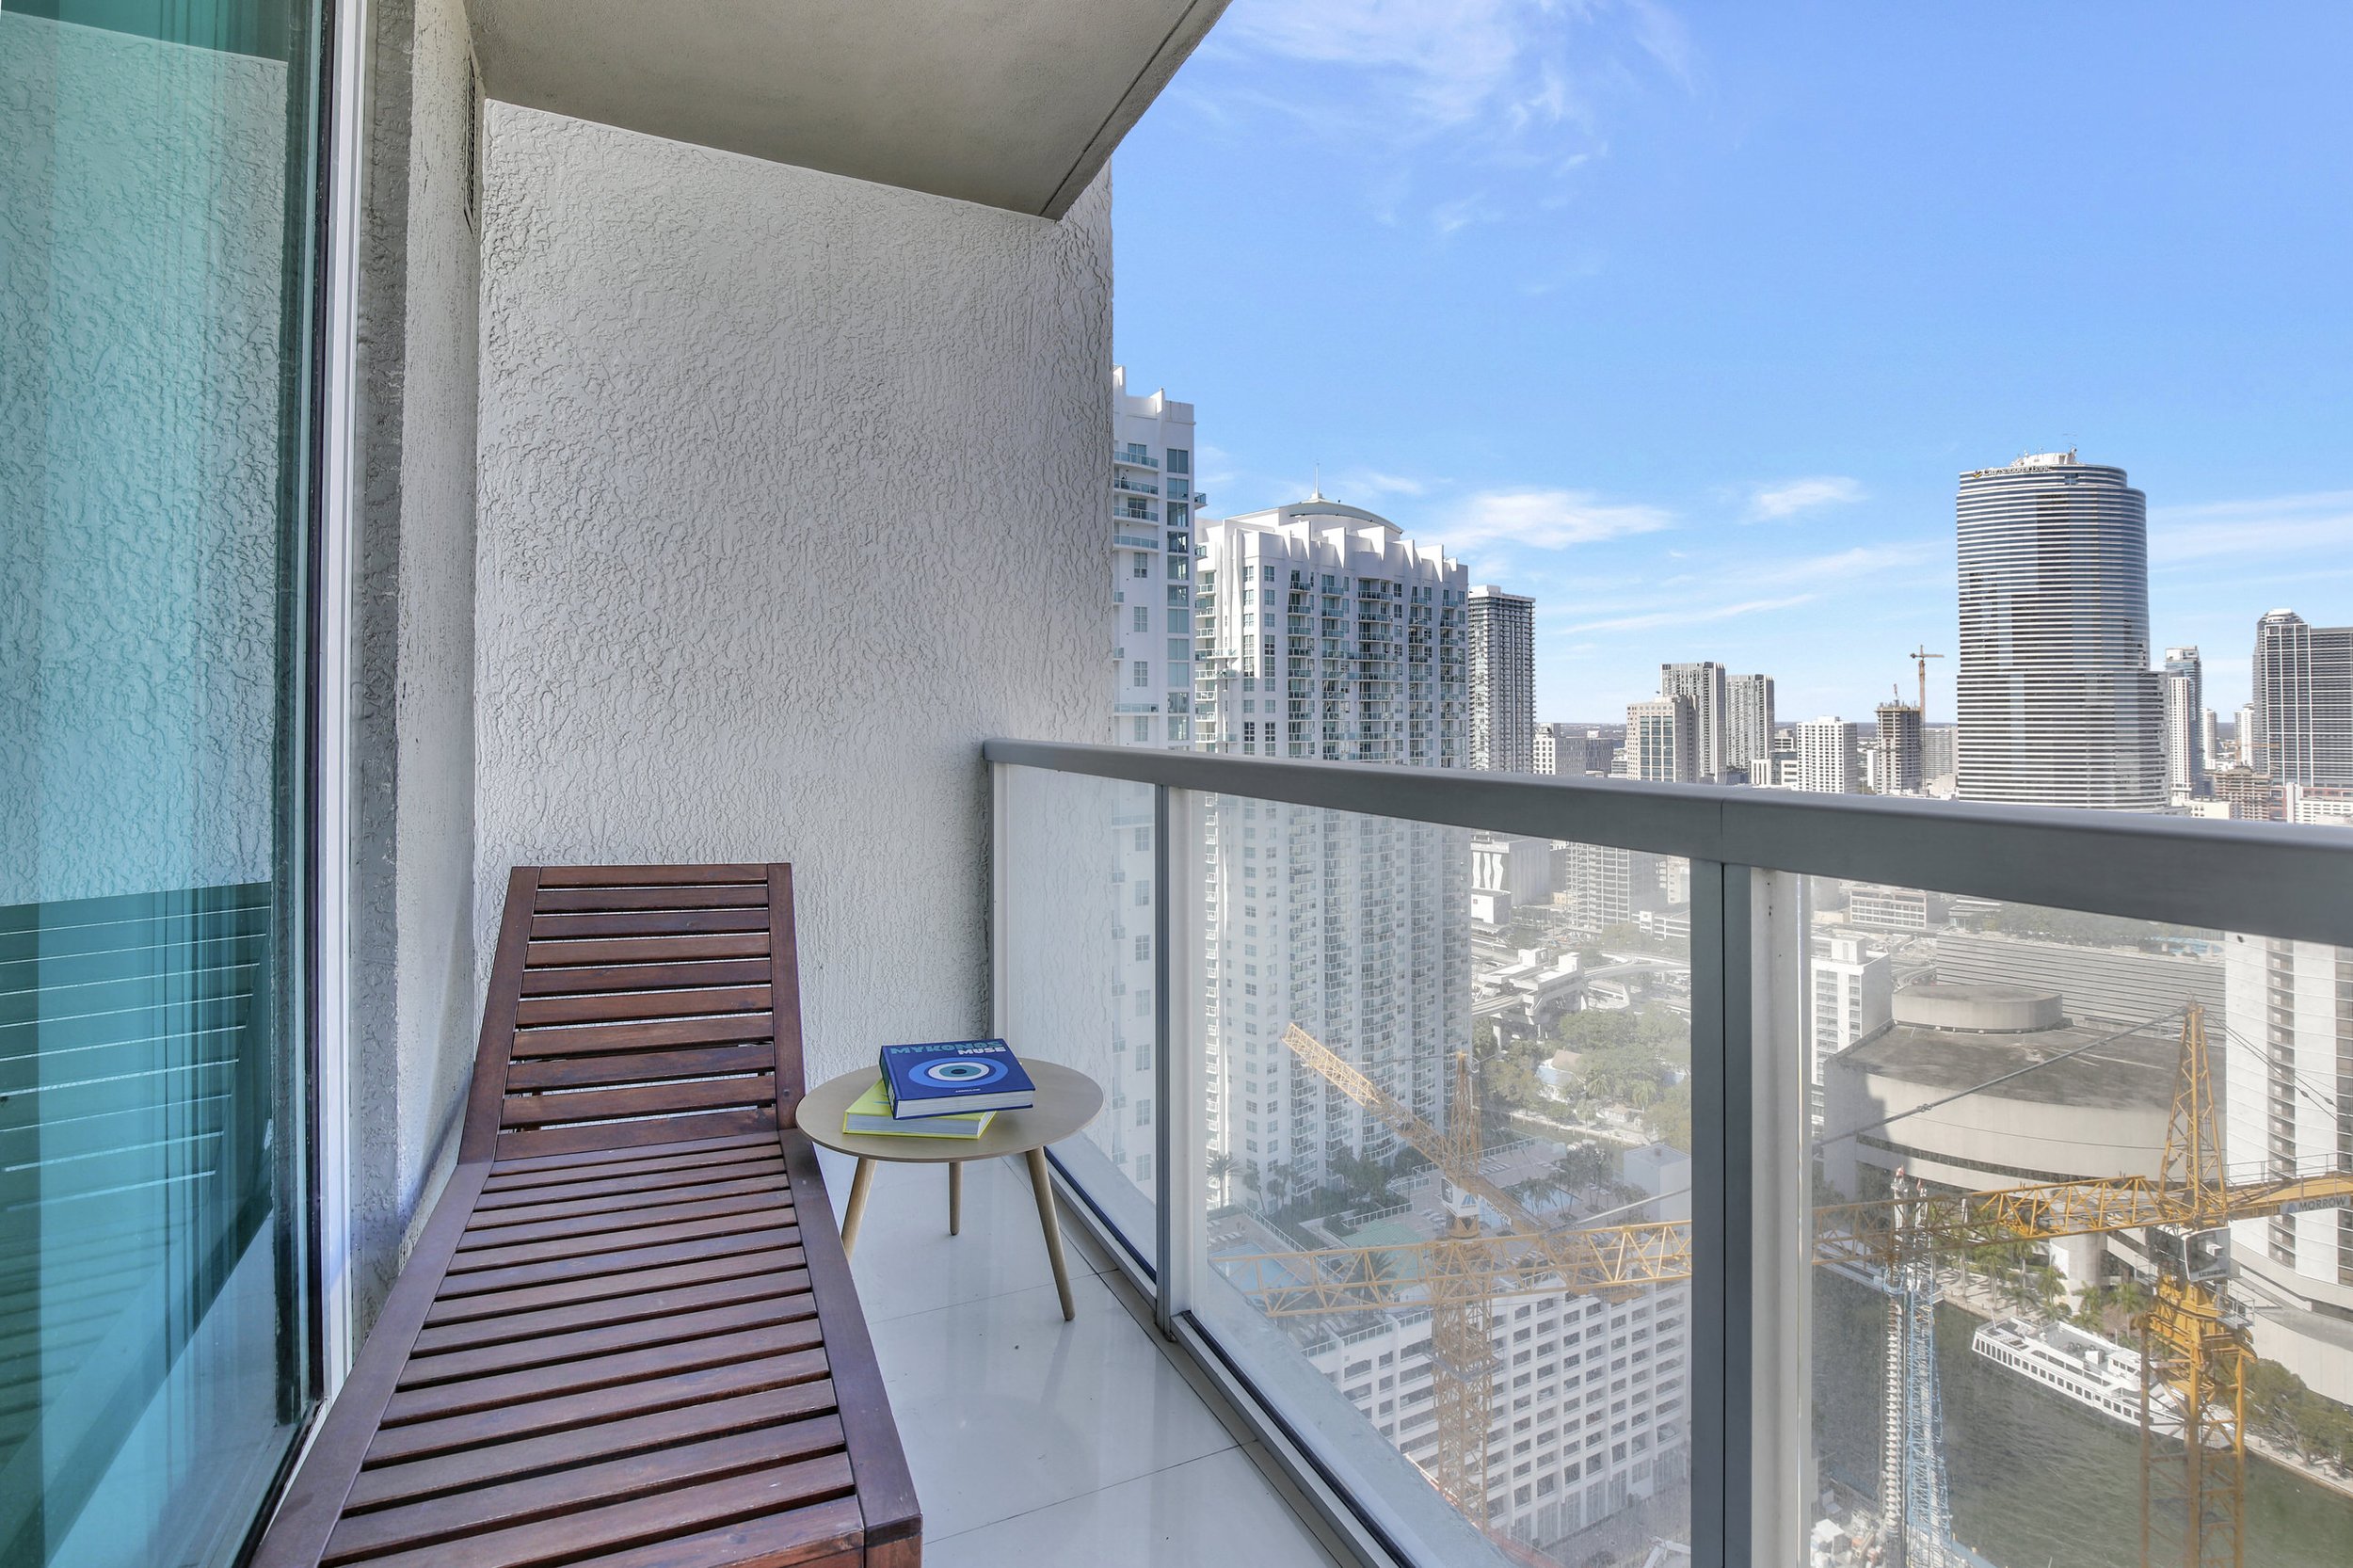 Check Out This Two-Bedroom Condo For Under $900K In Brickell 17.jpg